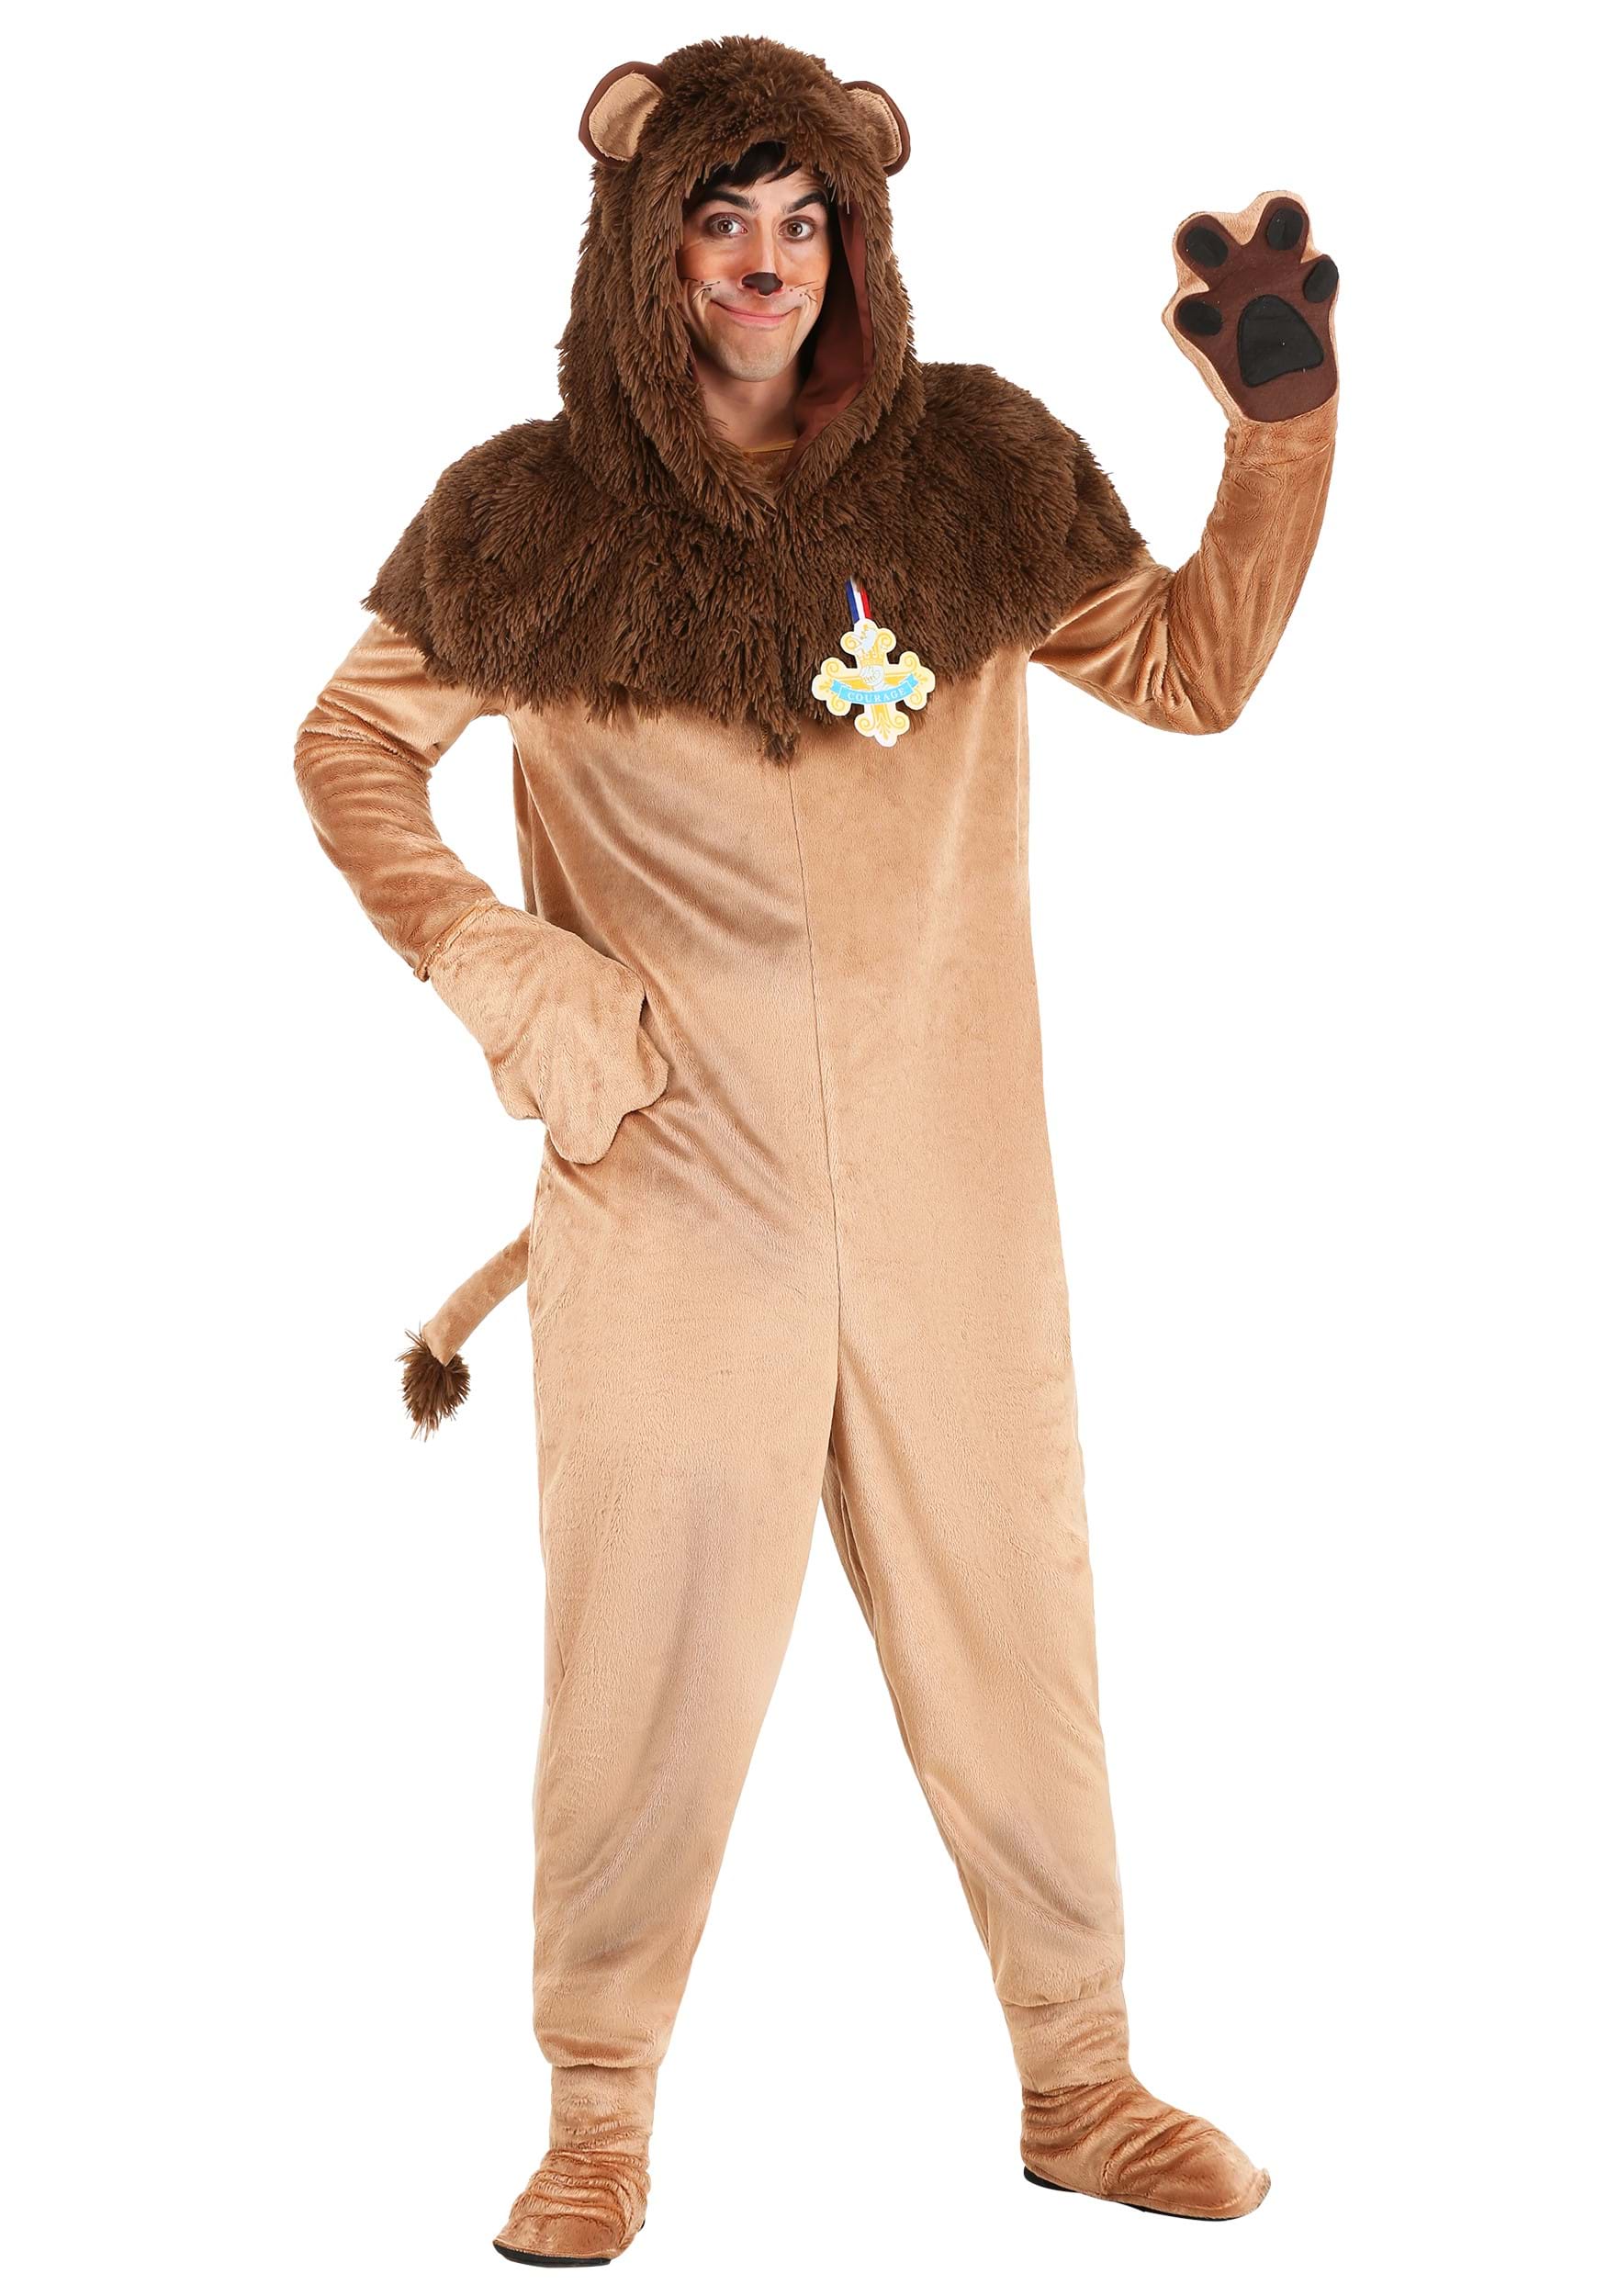 Photos - Fancy Dress Wizard FUN Costumes Cowardly Lion  of Oz Costume for Adults |  of Oz 